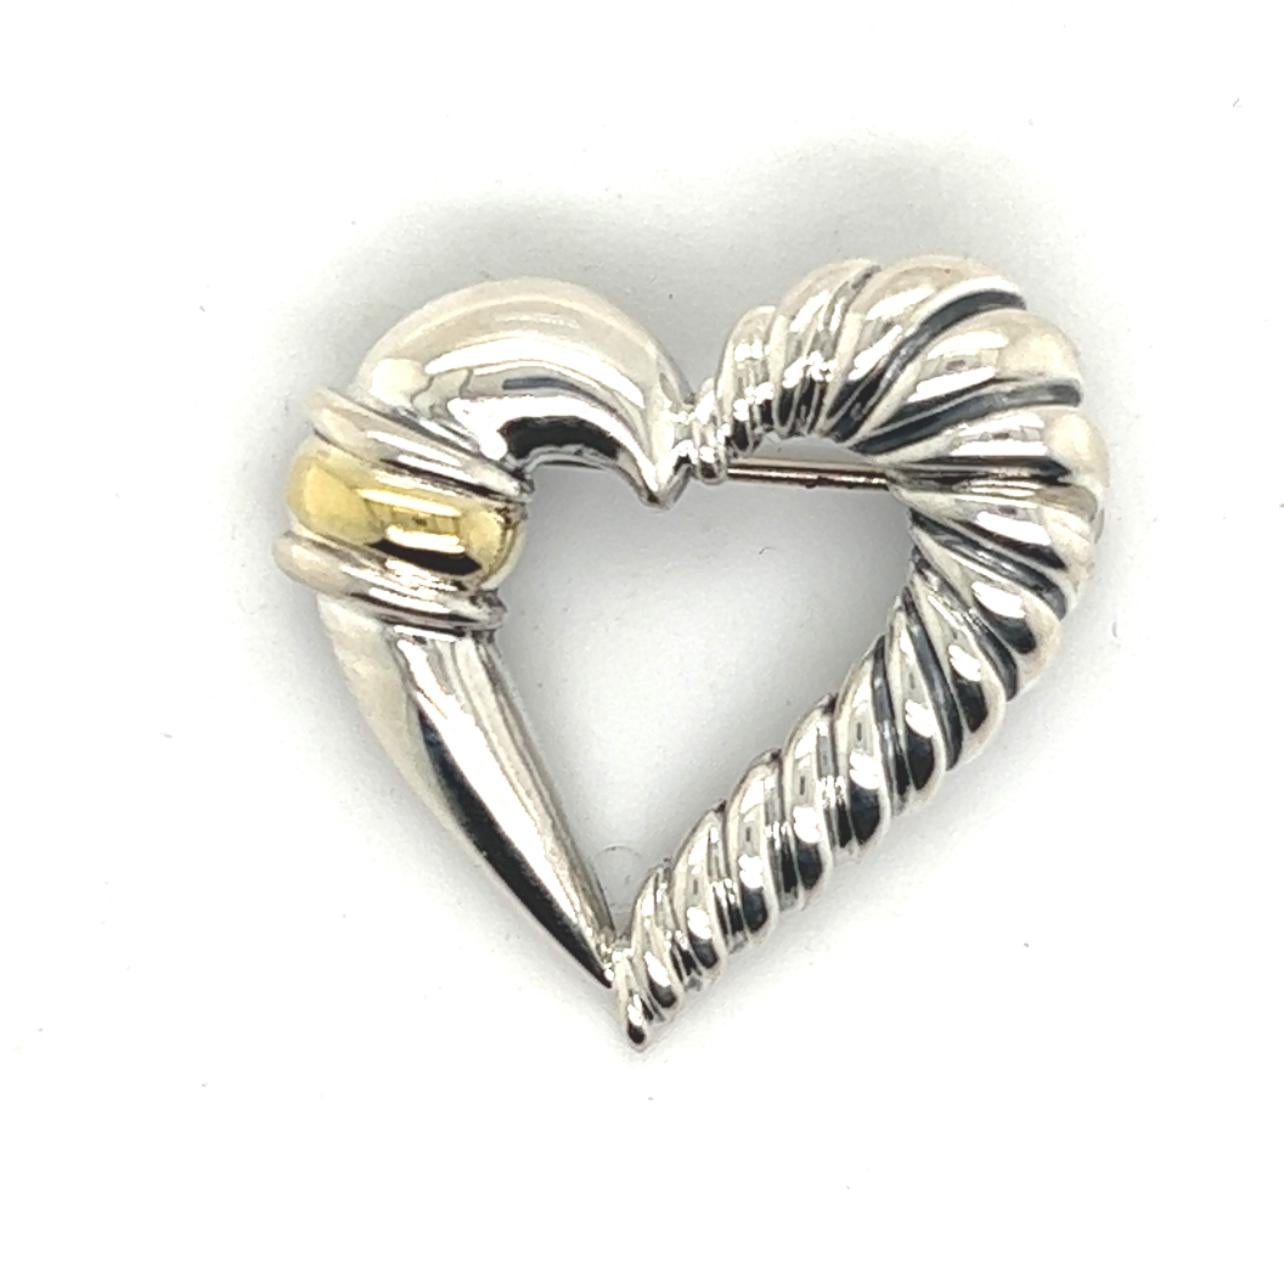 David Yurman Authentic Estate Heart Brooch Pin 14k Gold + Silver DY183

Retail: $799.00

TRUSTED SELLER SINCE 2002

PLEASE SEE OUR HUNDREDS OF POSITIVE FEEDBACKS FROM OUR CLIENTS!!

FREE SHIPPING

DETAILS
Weight: 5.60 Grams
Metal: Sterling Silver &